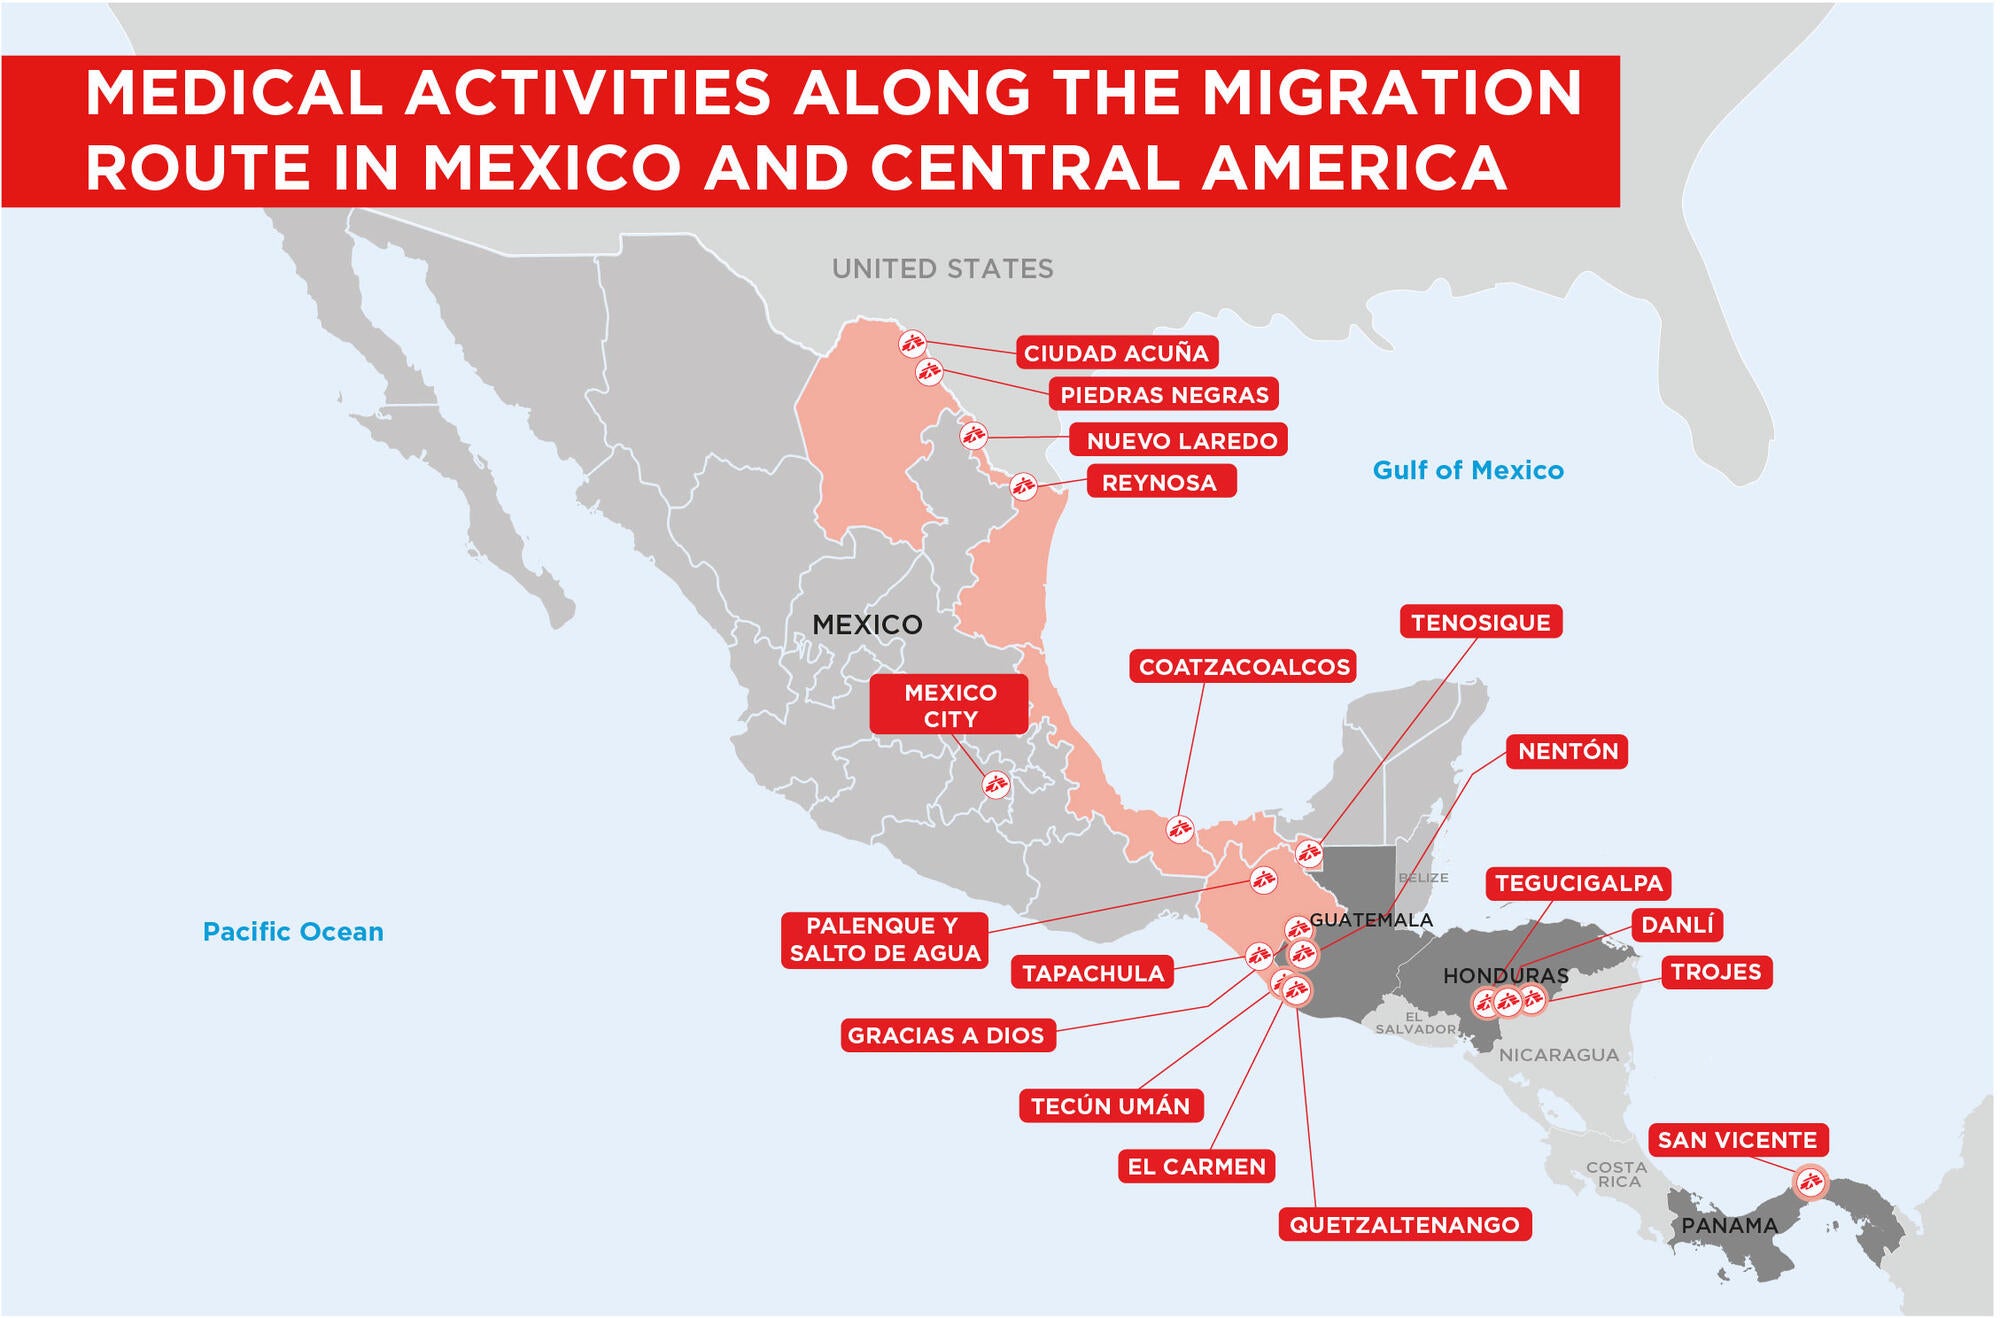 Medical activities along the migration route_MxCA